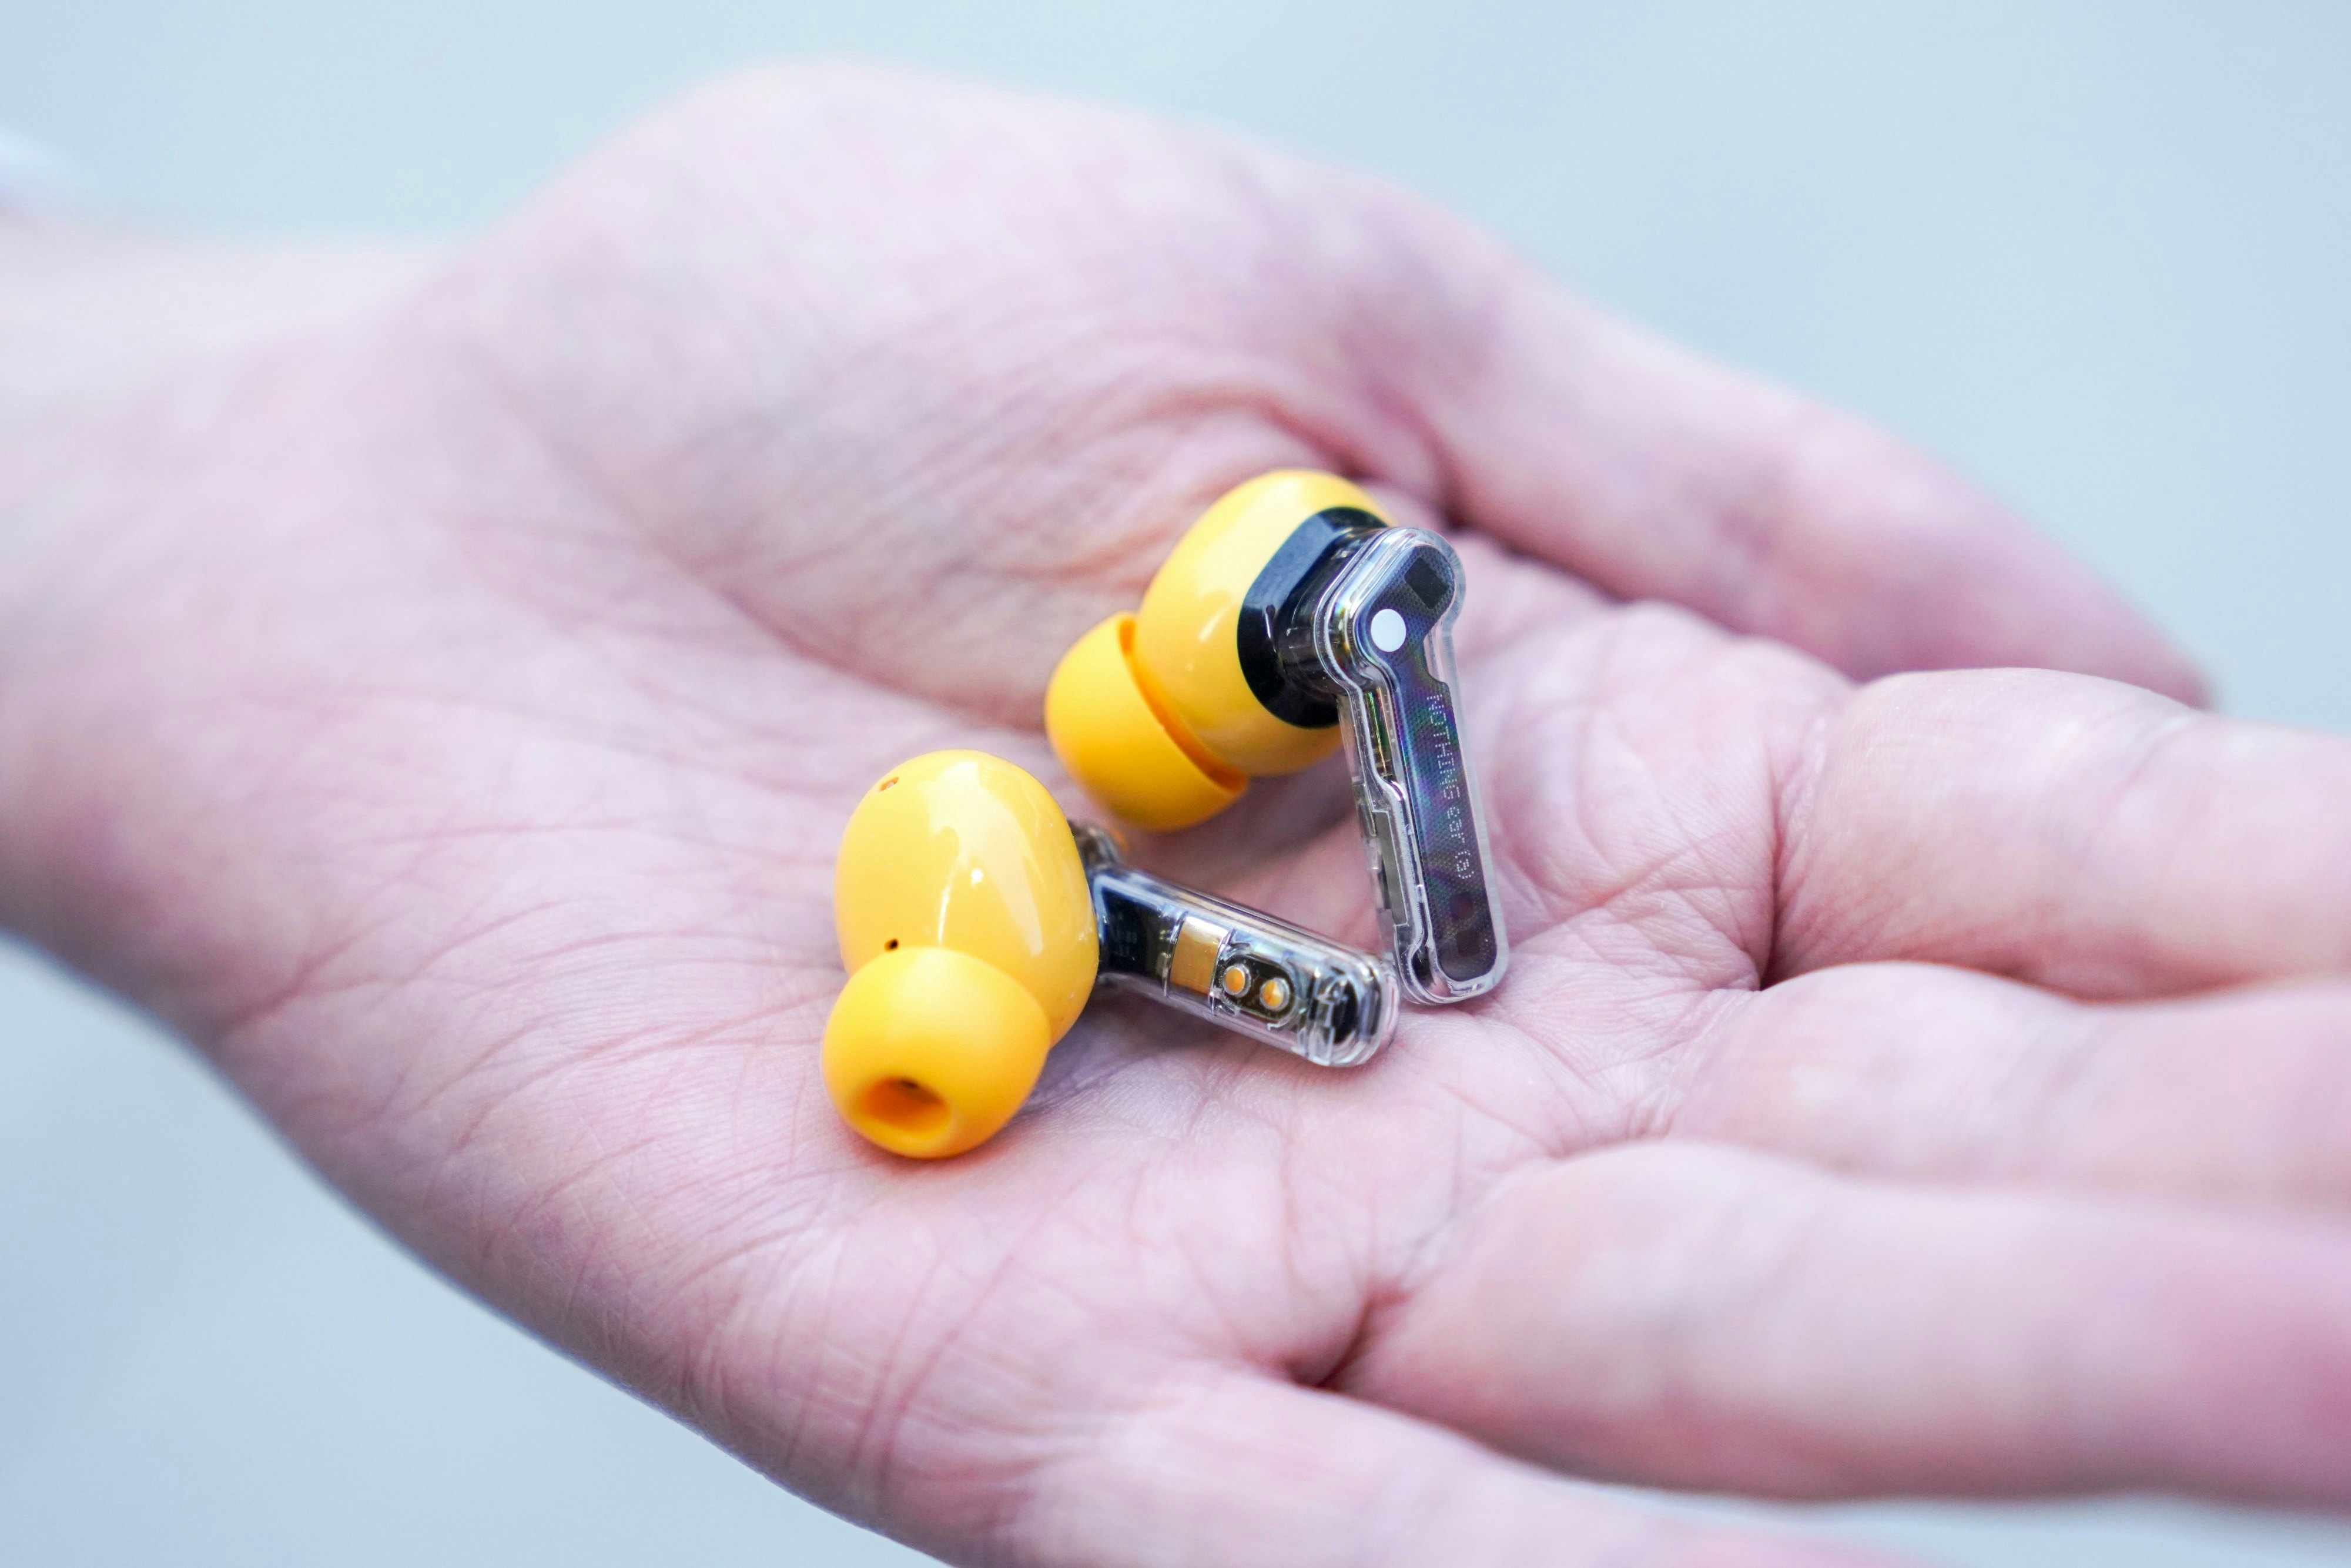 Nothing Ear A Review: These $99 Wireless Earbuds Are Bright, Stylish, and an Unbeatable Value